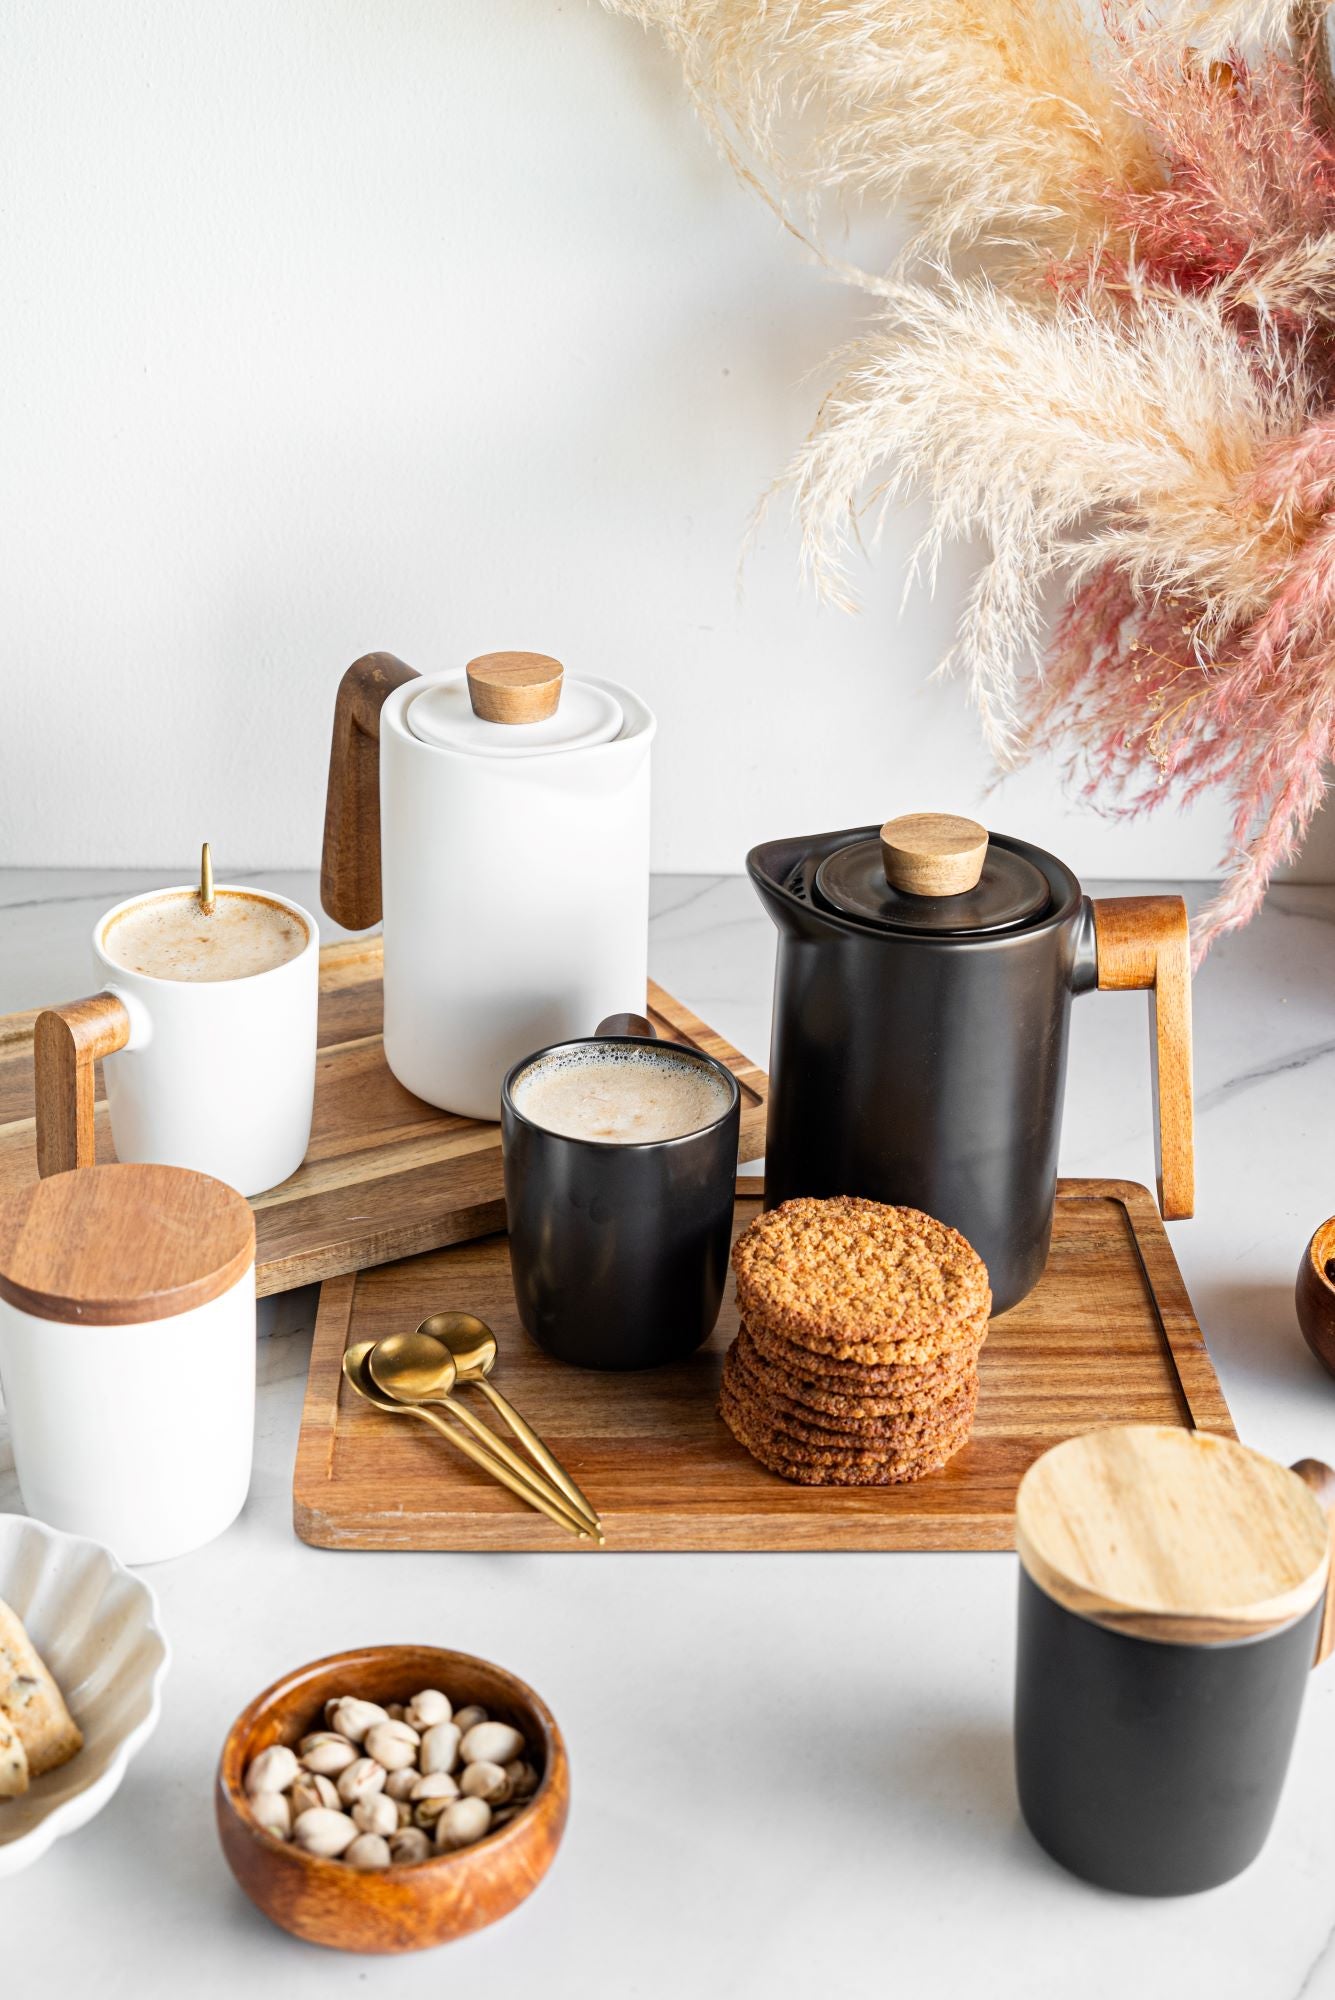 Nordic Tea/Coffee Set with Wooden Tray